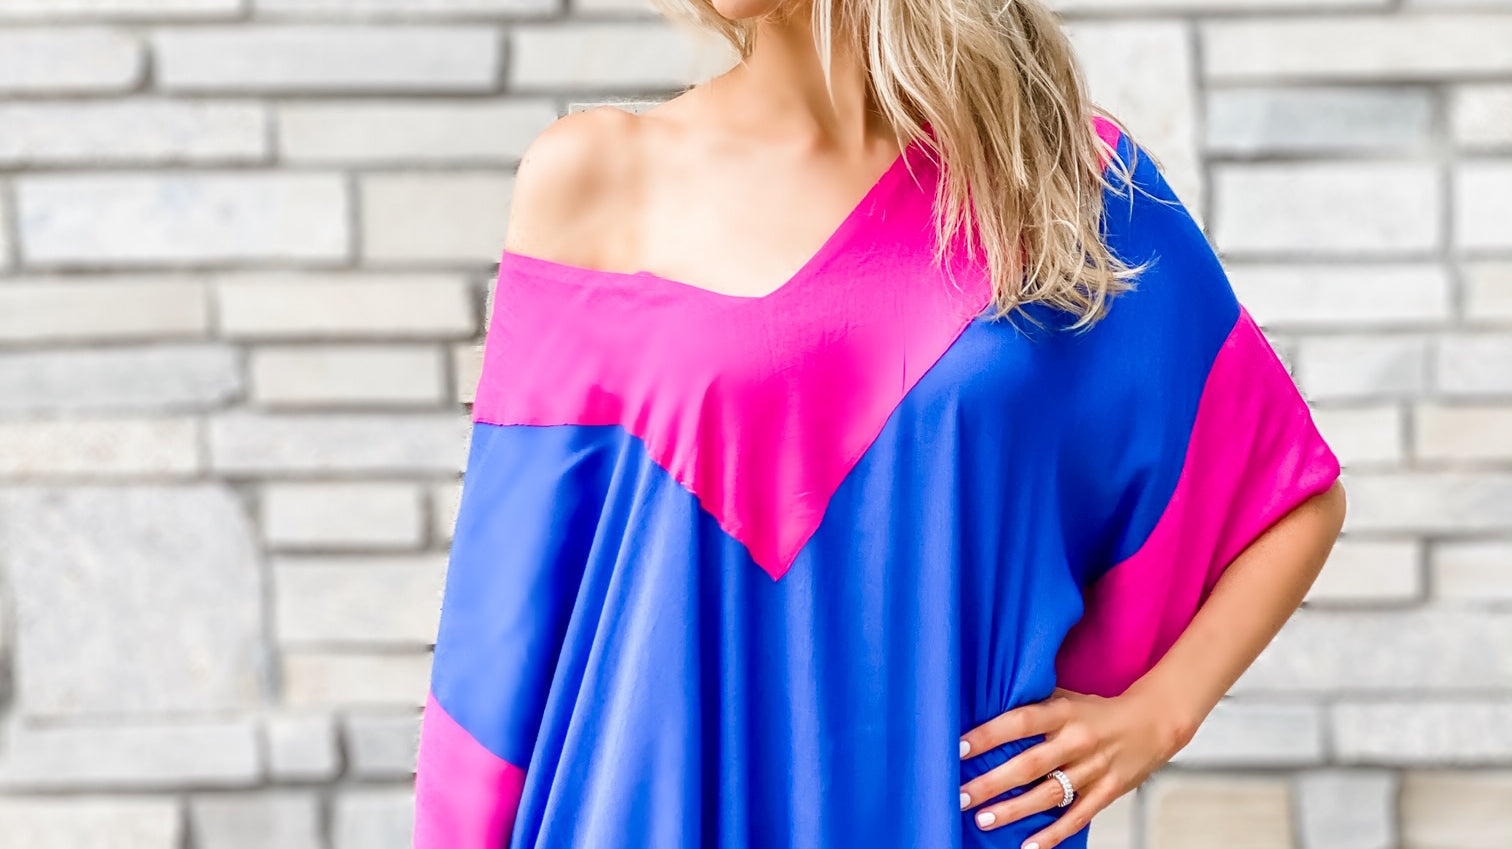 How to wear a Caftan